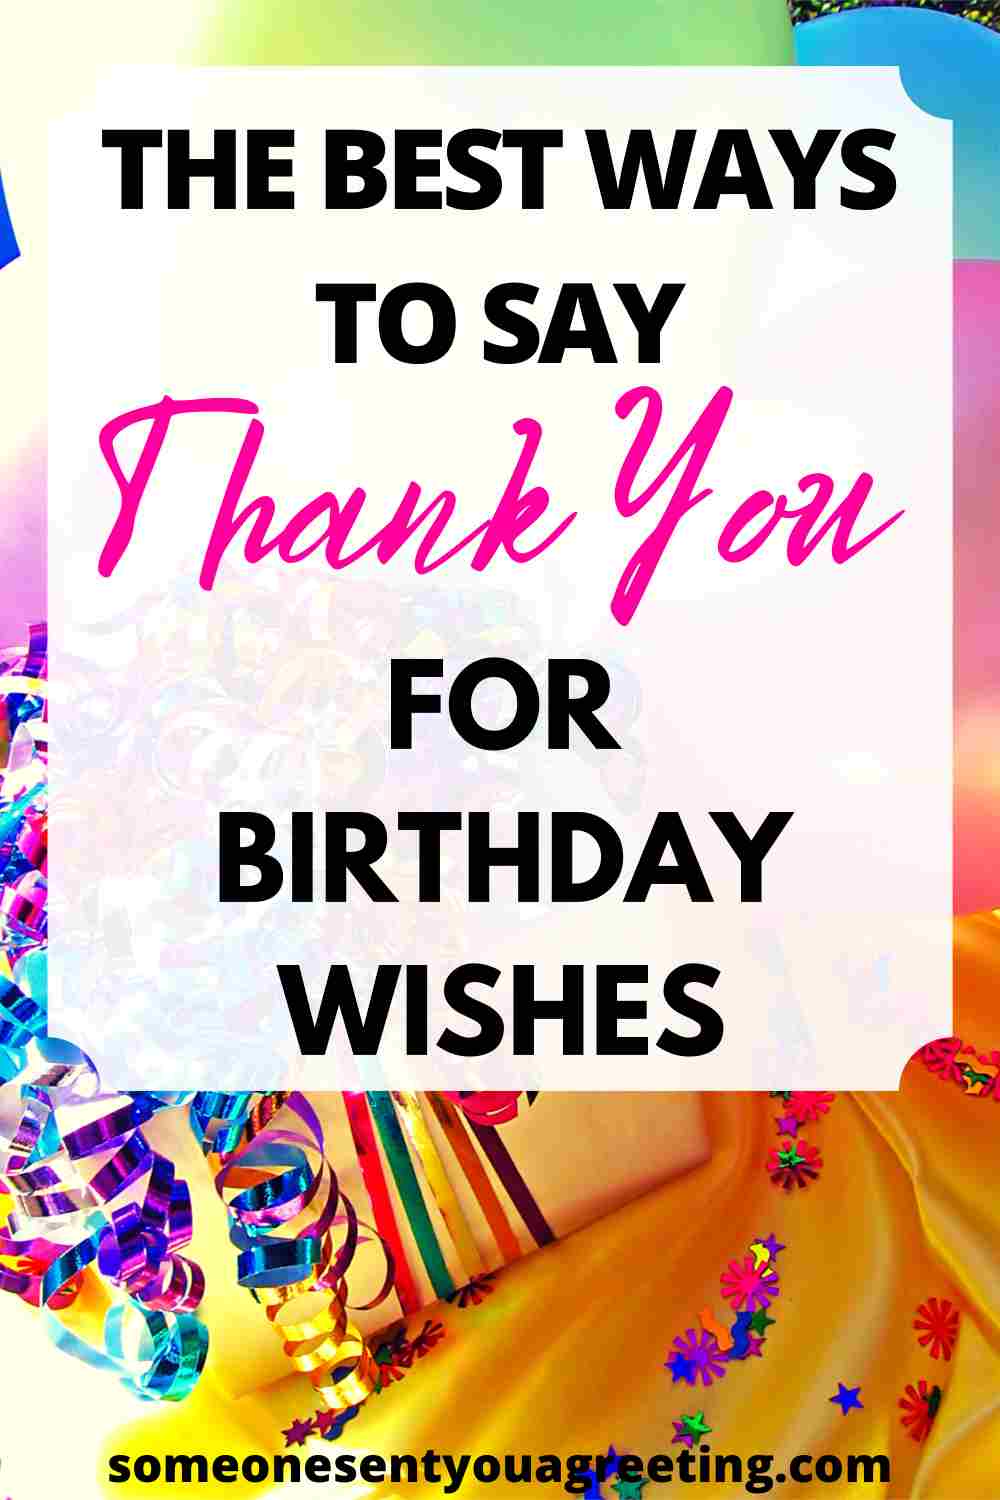 The 41 Best Ways to Say Thank You for Birthday Wishes - Someone Sent You A  Greeting